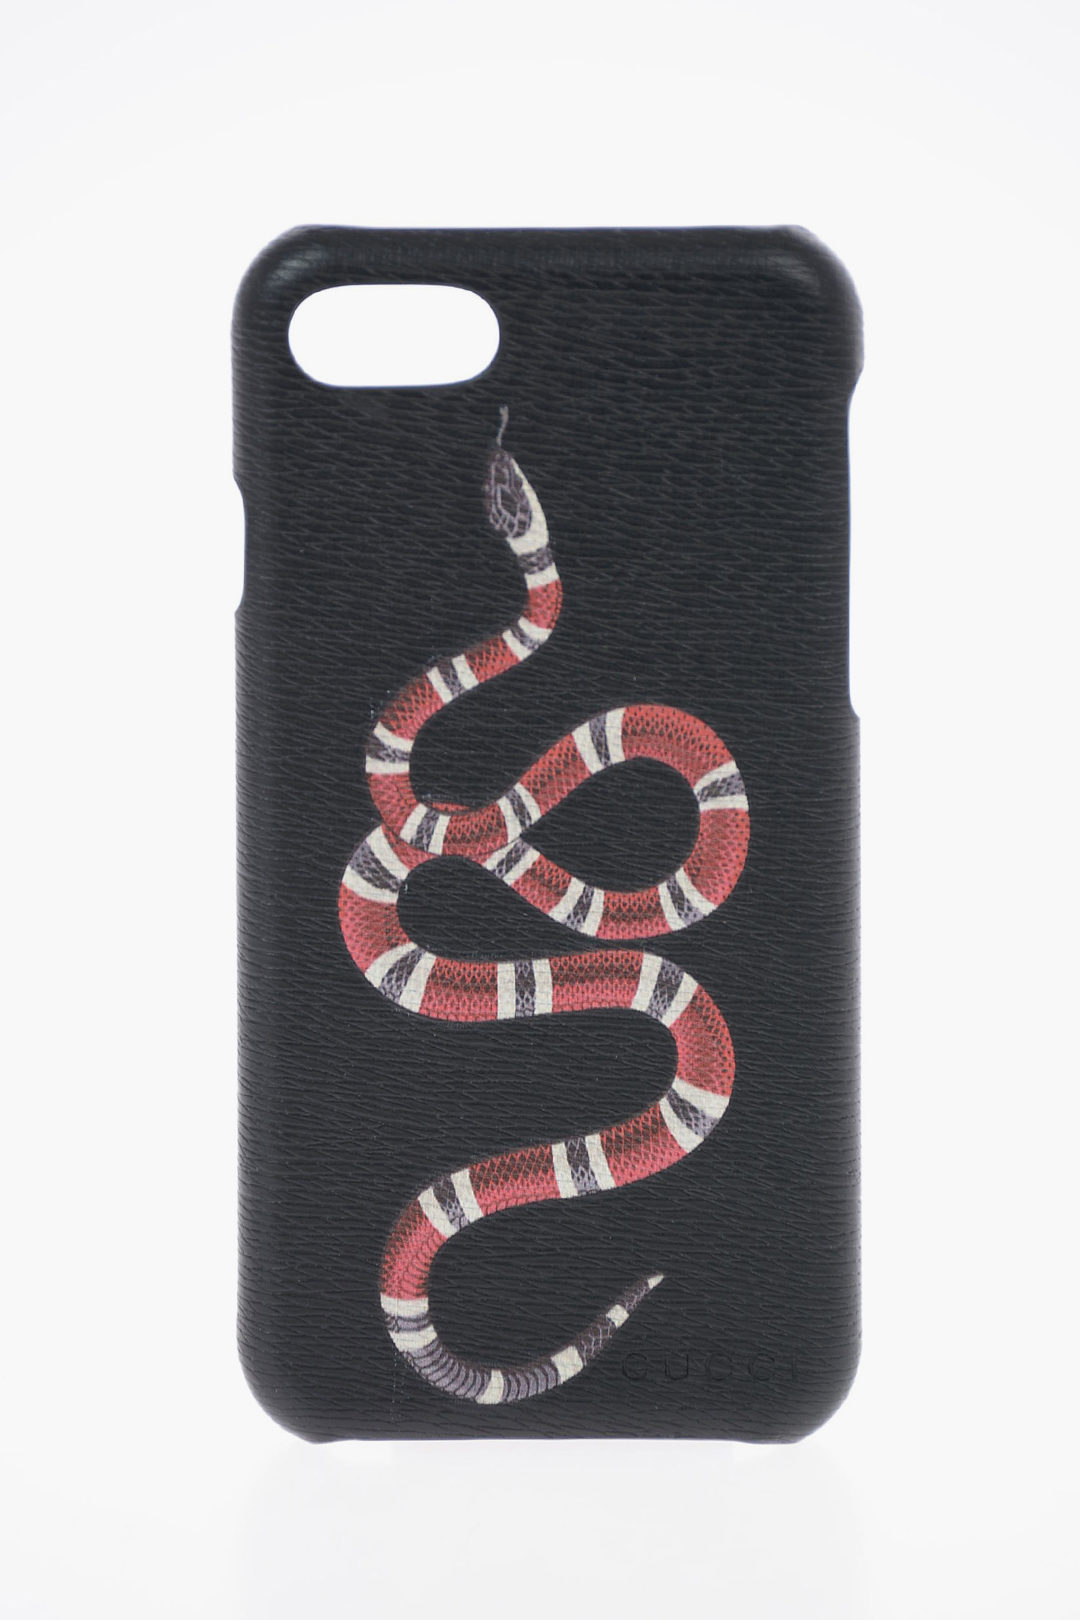 Gucci Leather Snake Printed Iphone 8 Cover Unisex Men Women Glamood Outlet